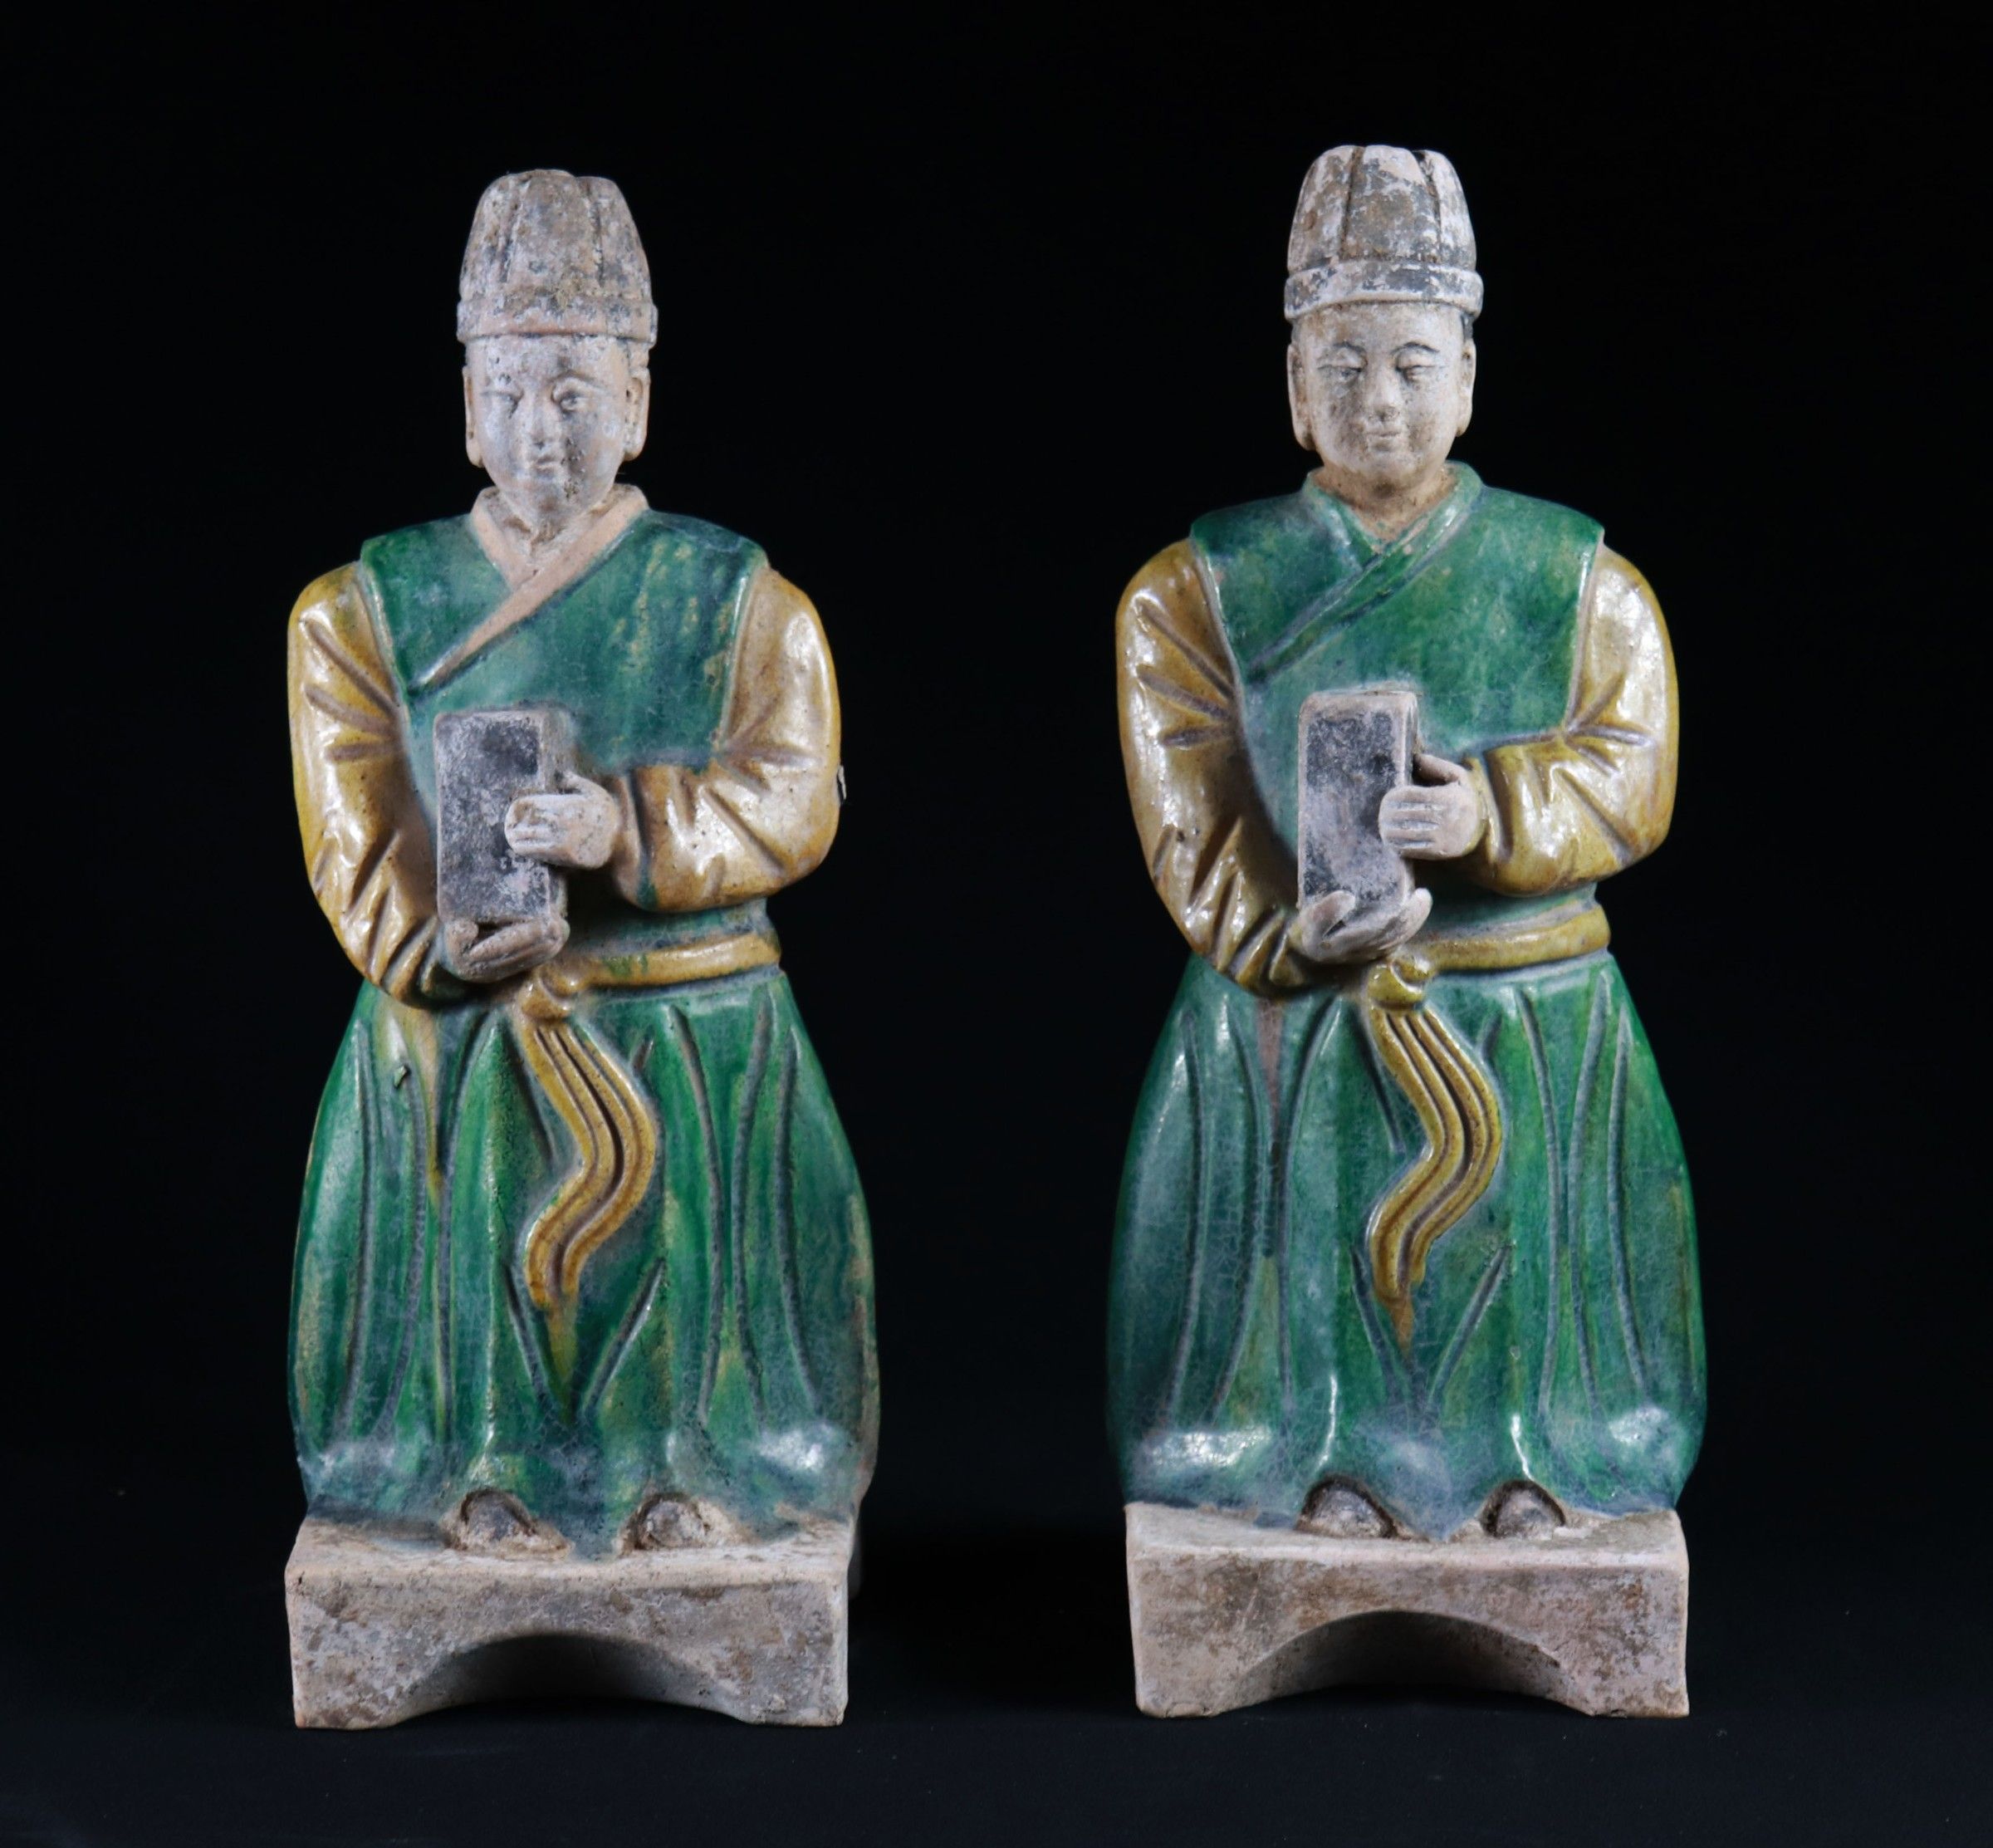 Decorative arts from around the world - Asian, Ancient World, Americas